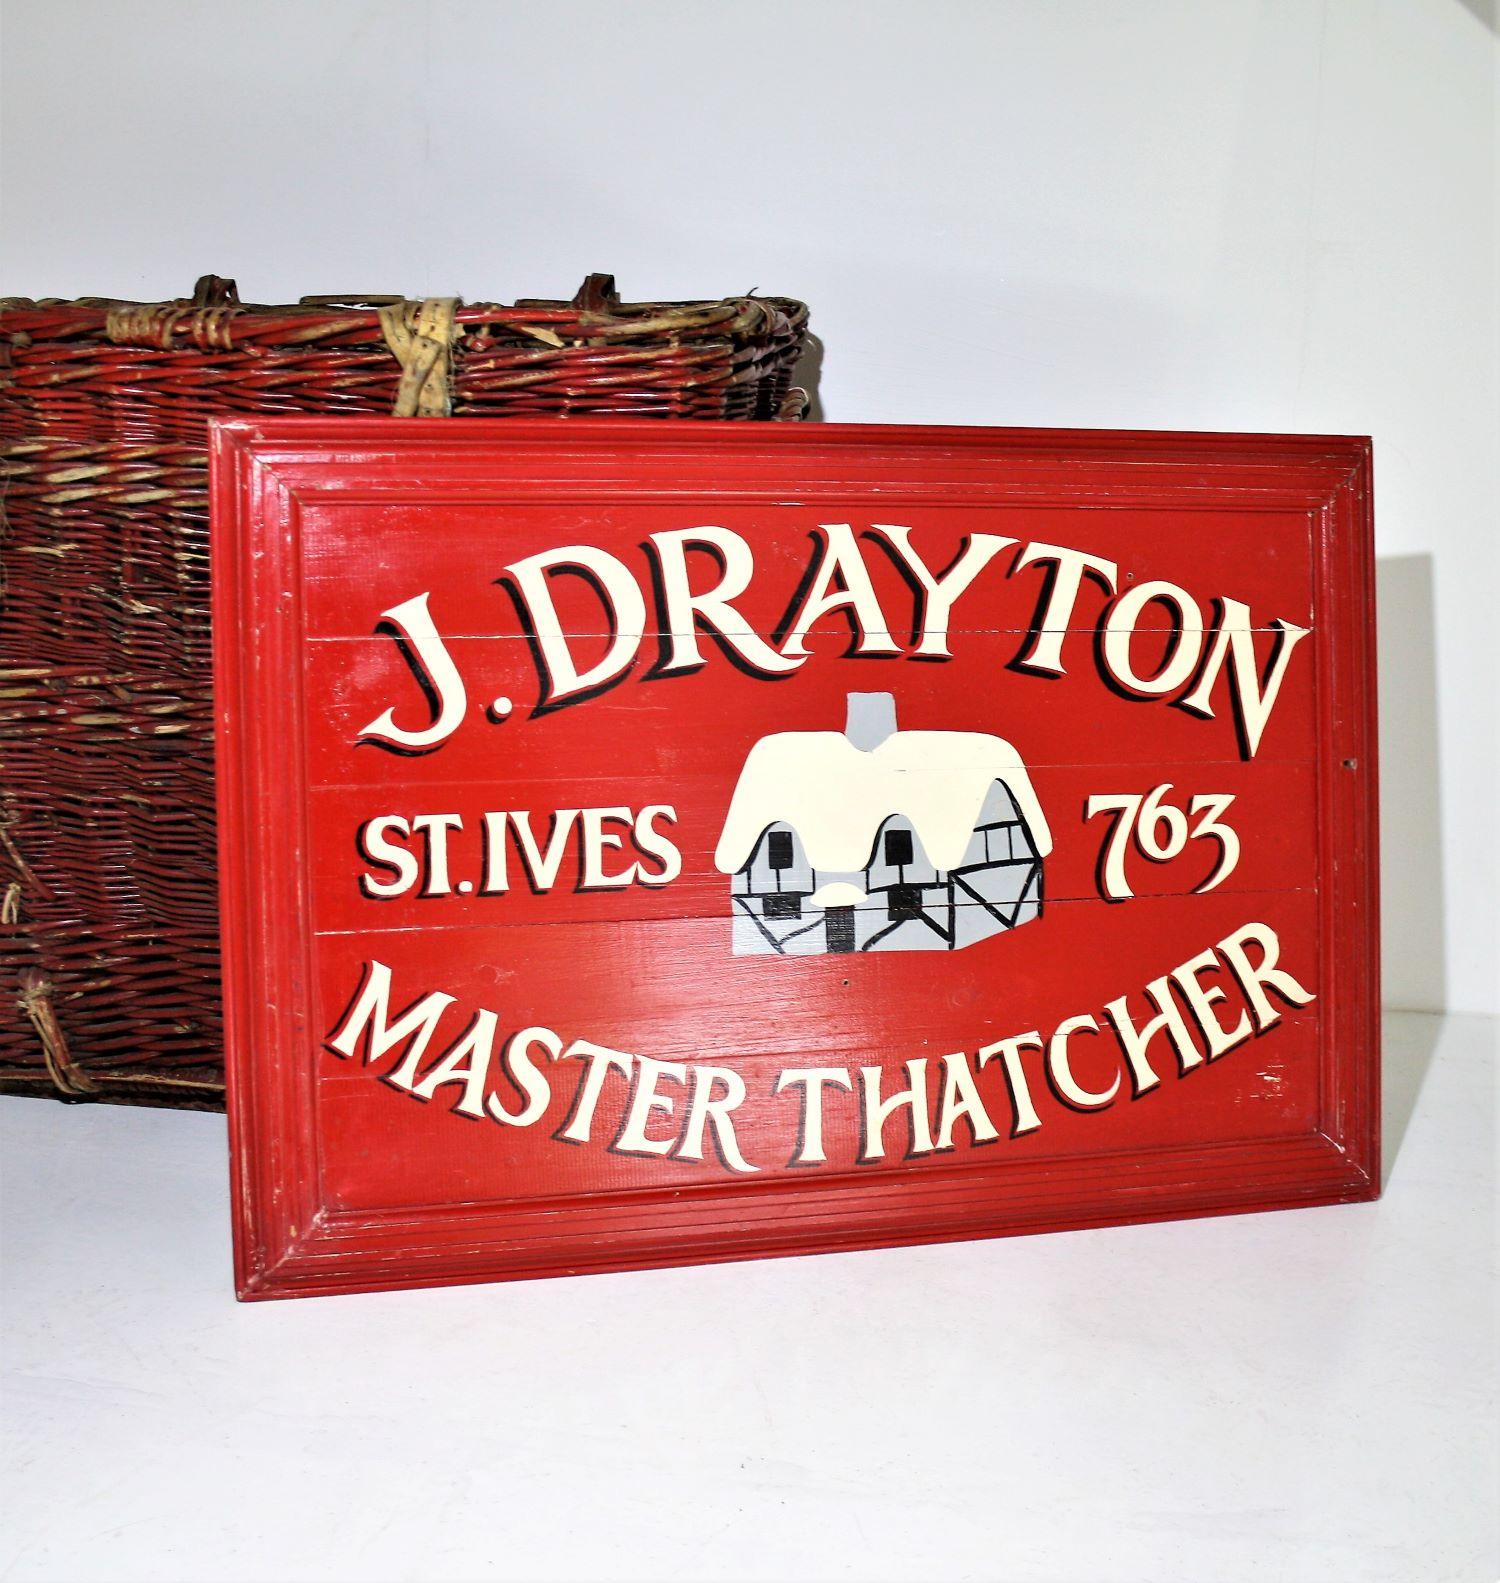 Softwood Large Old Hand Painted Wooden Sign for J.Drayton St Ives Cornwall England For Sale